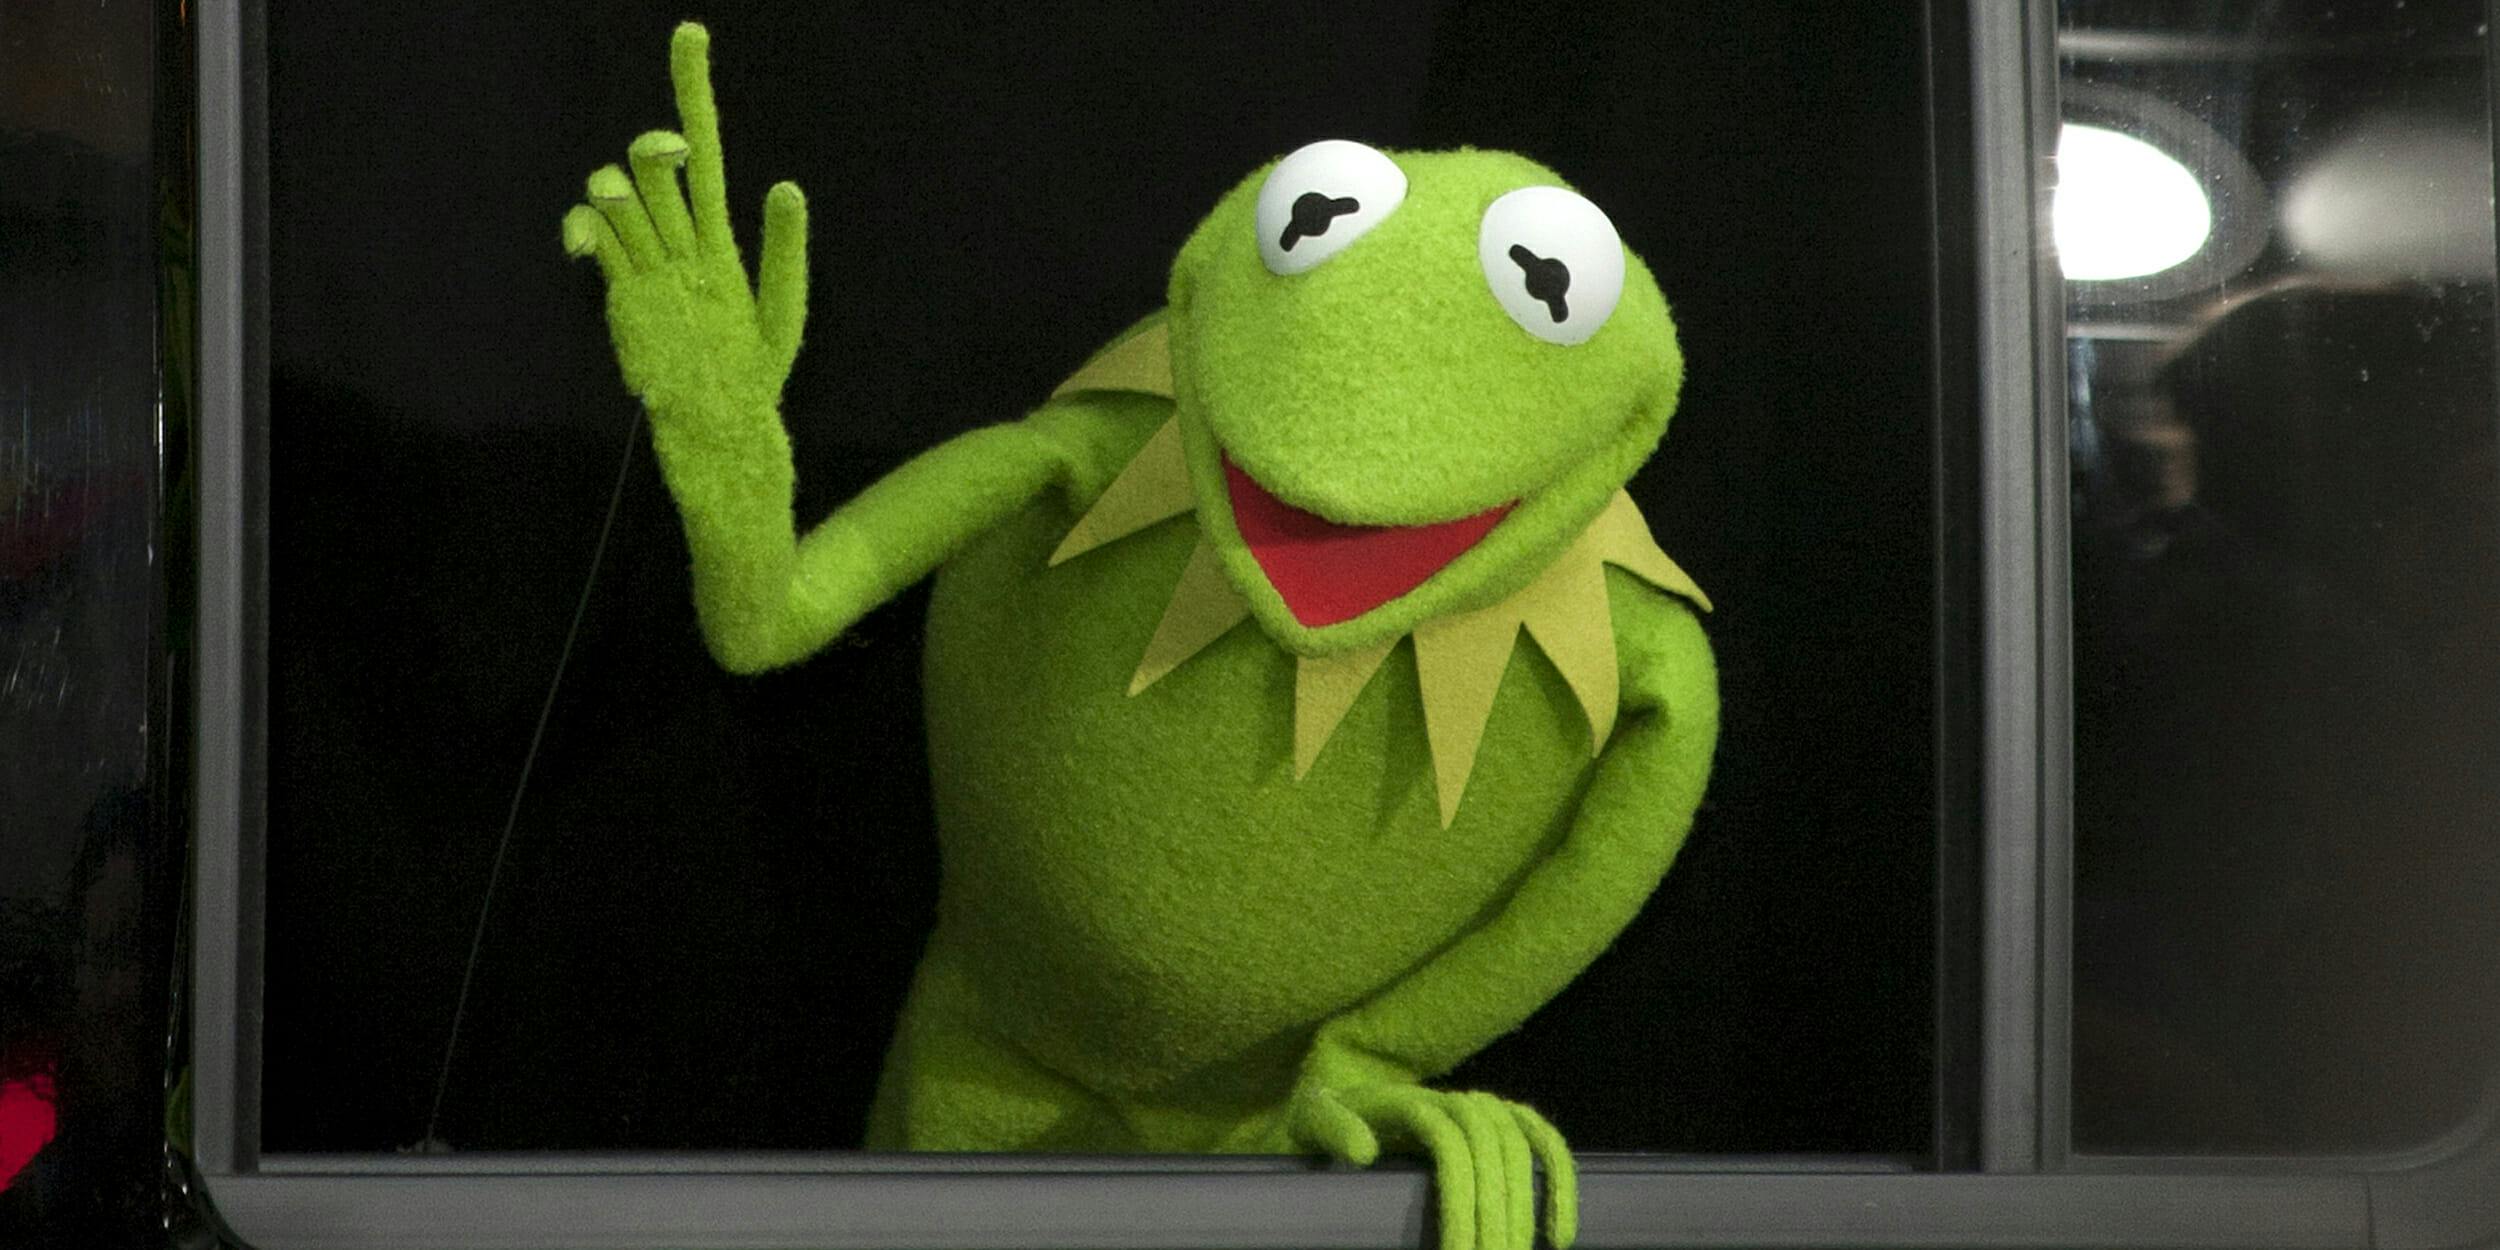 I will drink to that! Make it a Double - Kermit Drinking Tea